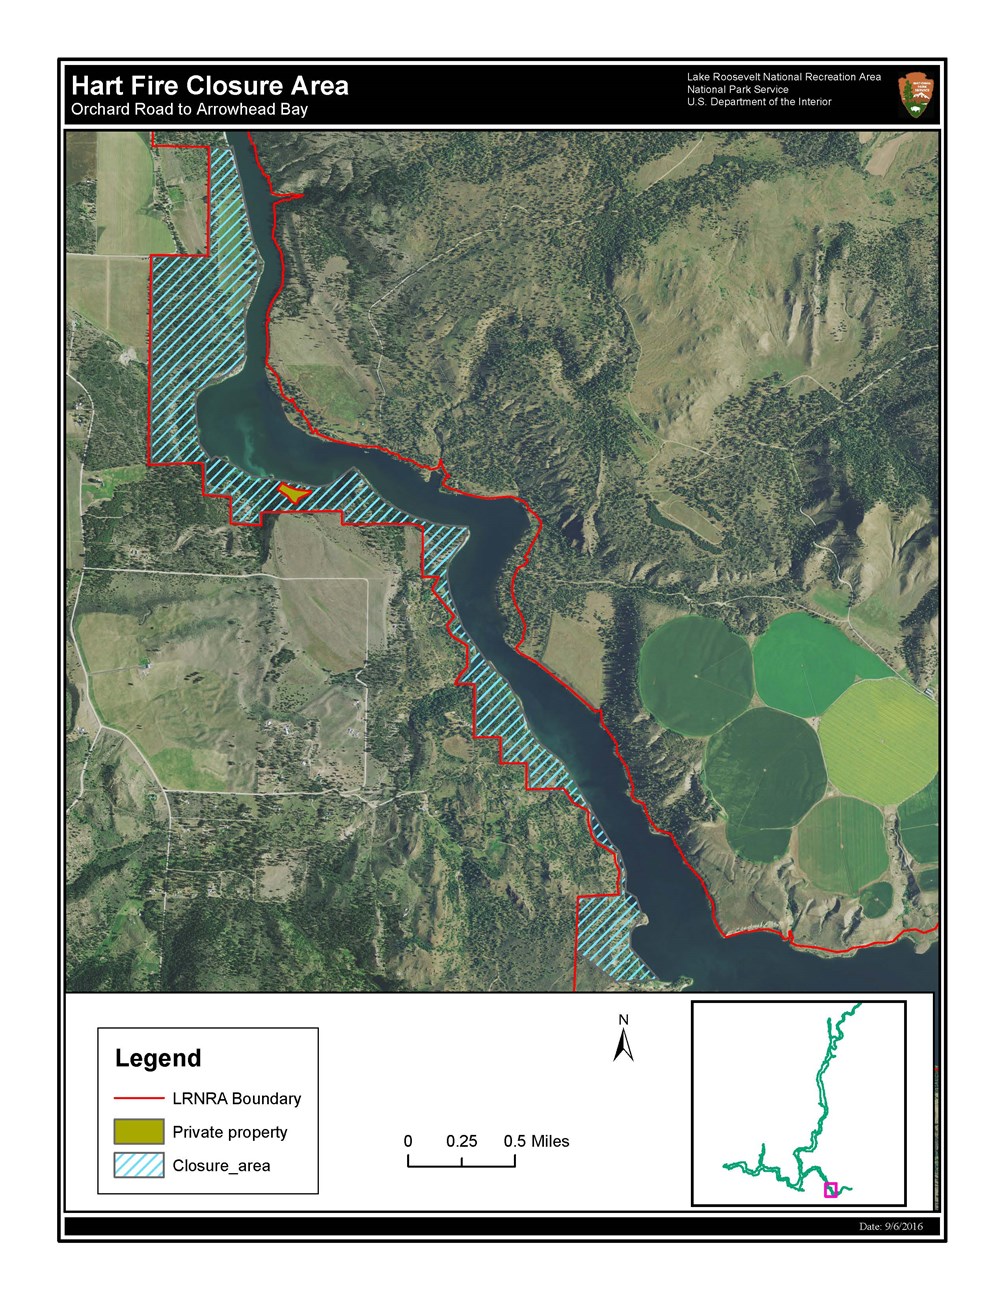 Map of closed area at Lake Roosevelt National Recreation Area